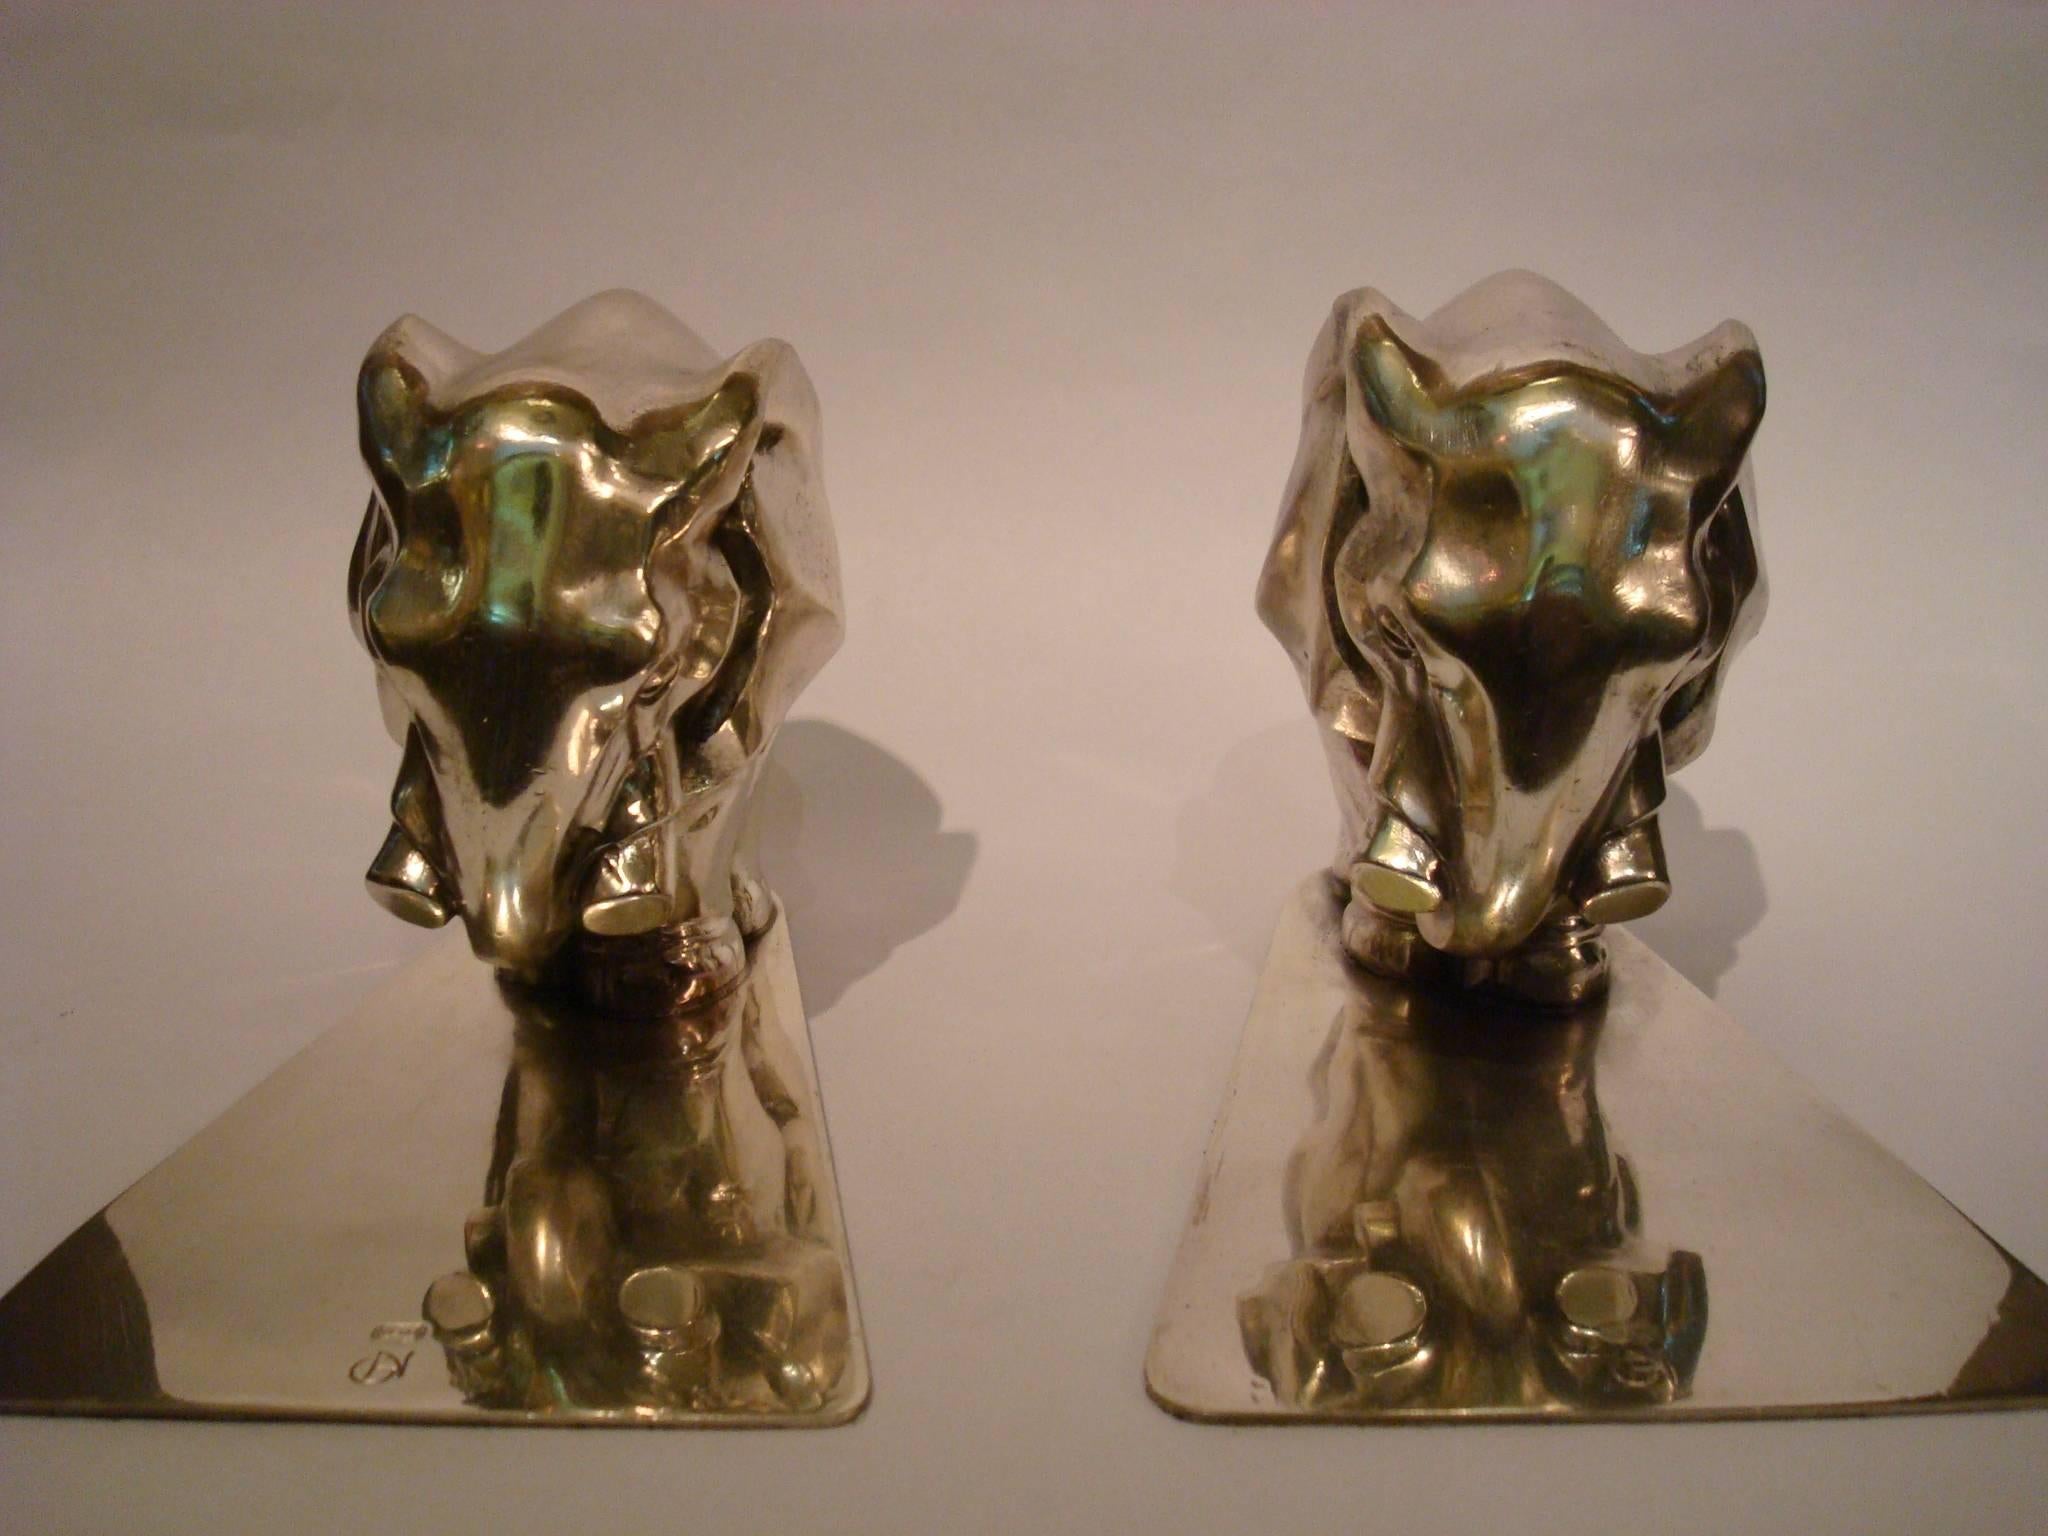 Pair of Art Deco Elephant Bookends by George Nilsson for Gero Holland 1